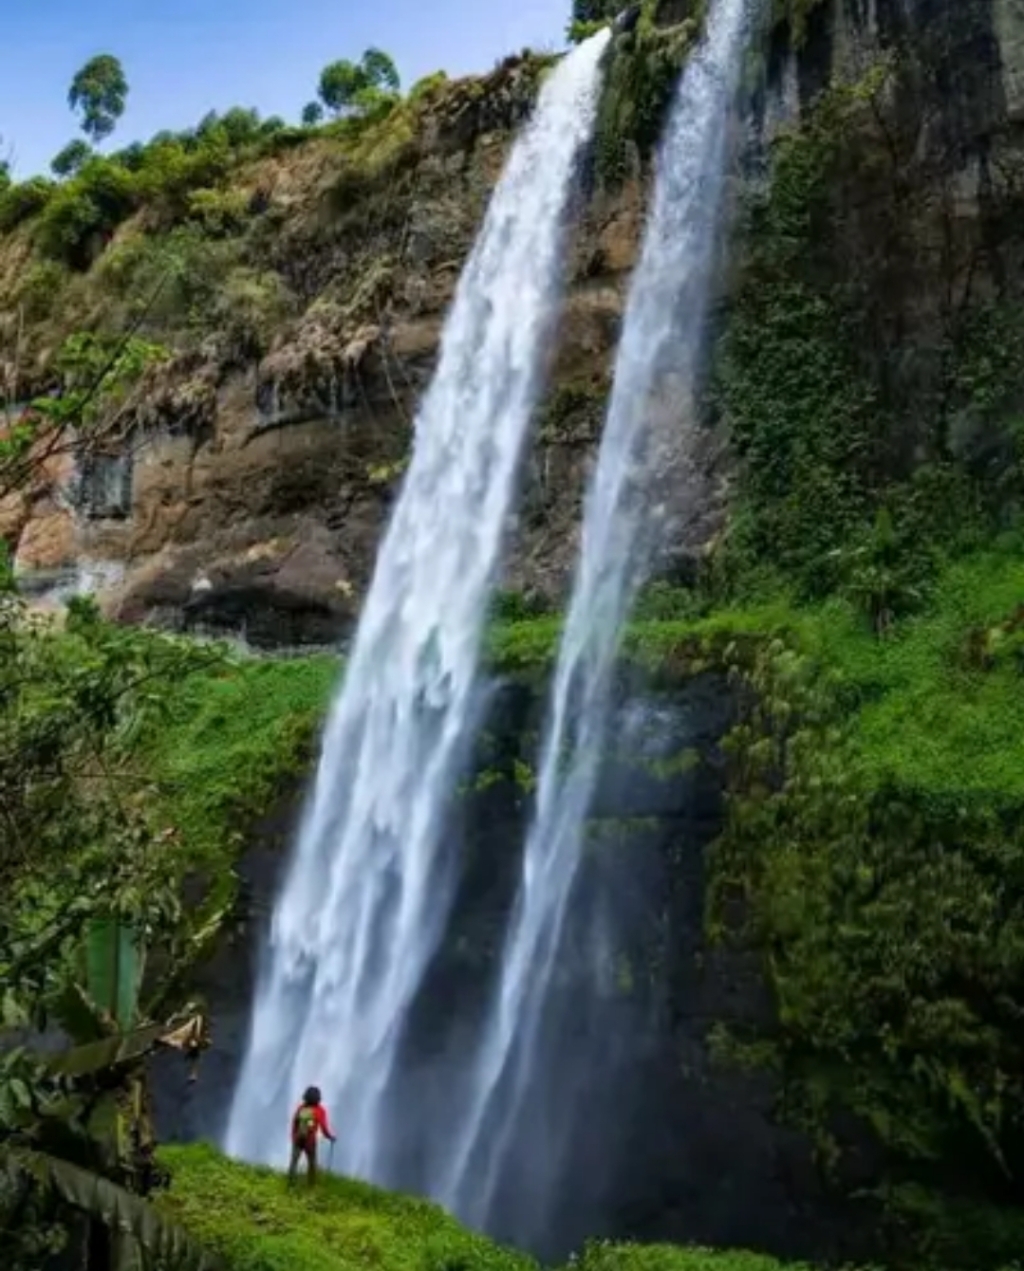 Sipi Falls, A Story of Beauty and Adventure, Told by Gimba Liz the Tourist